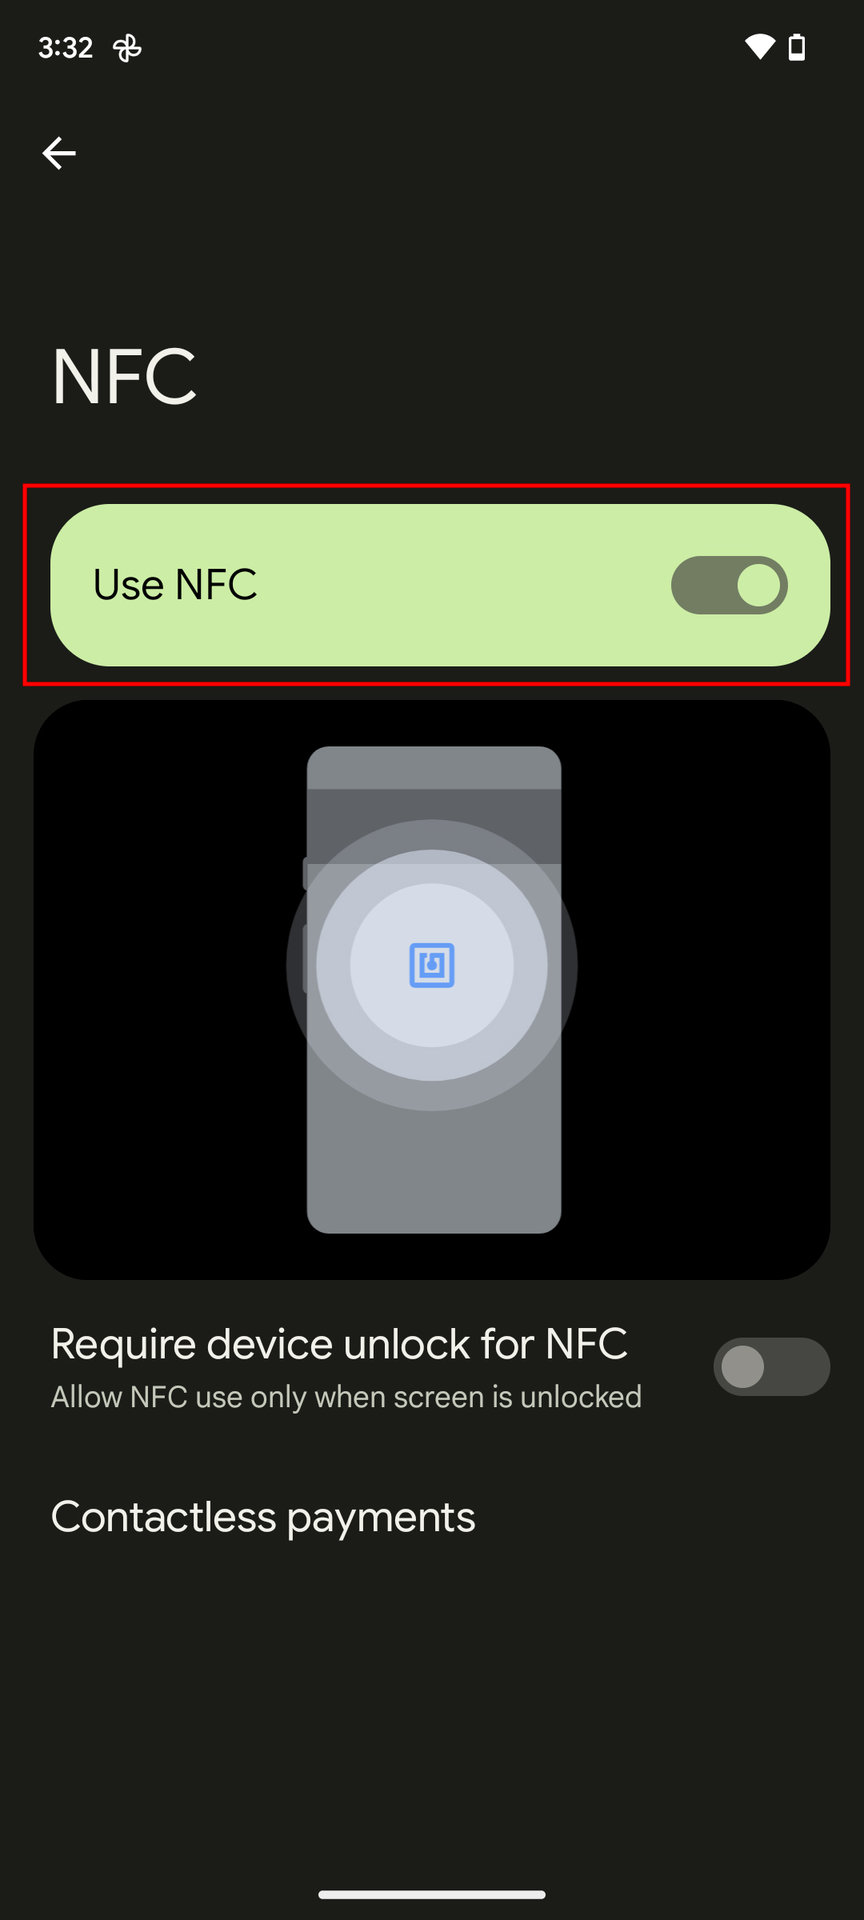 How to activate NFC on Android 4